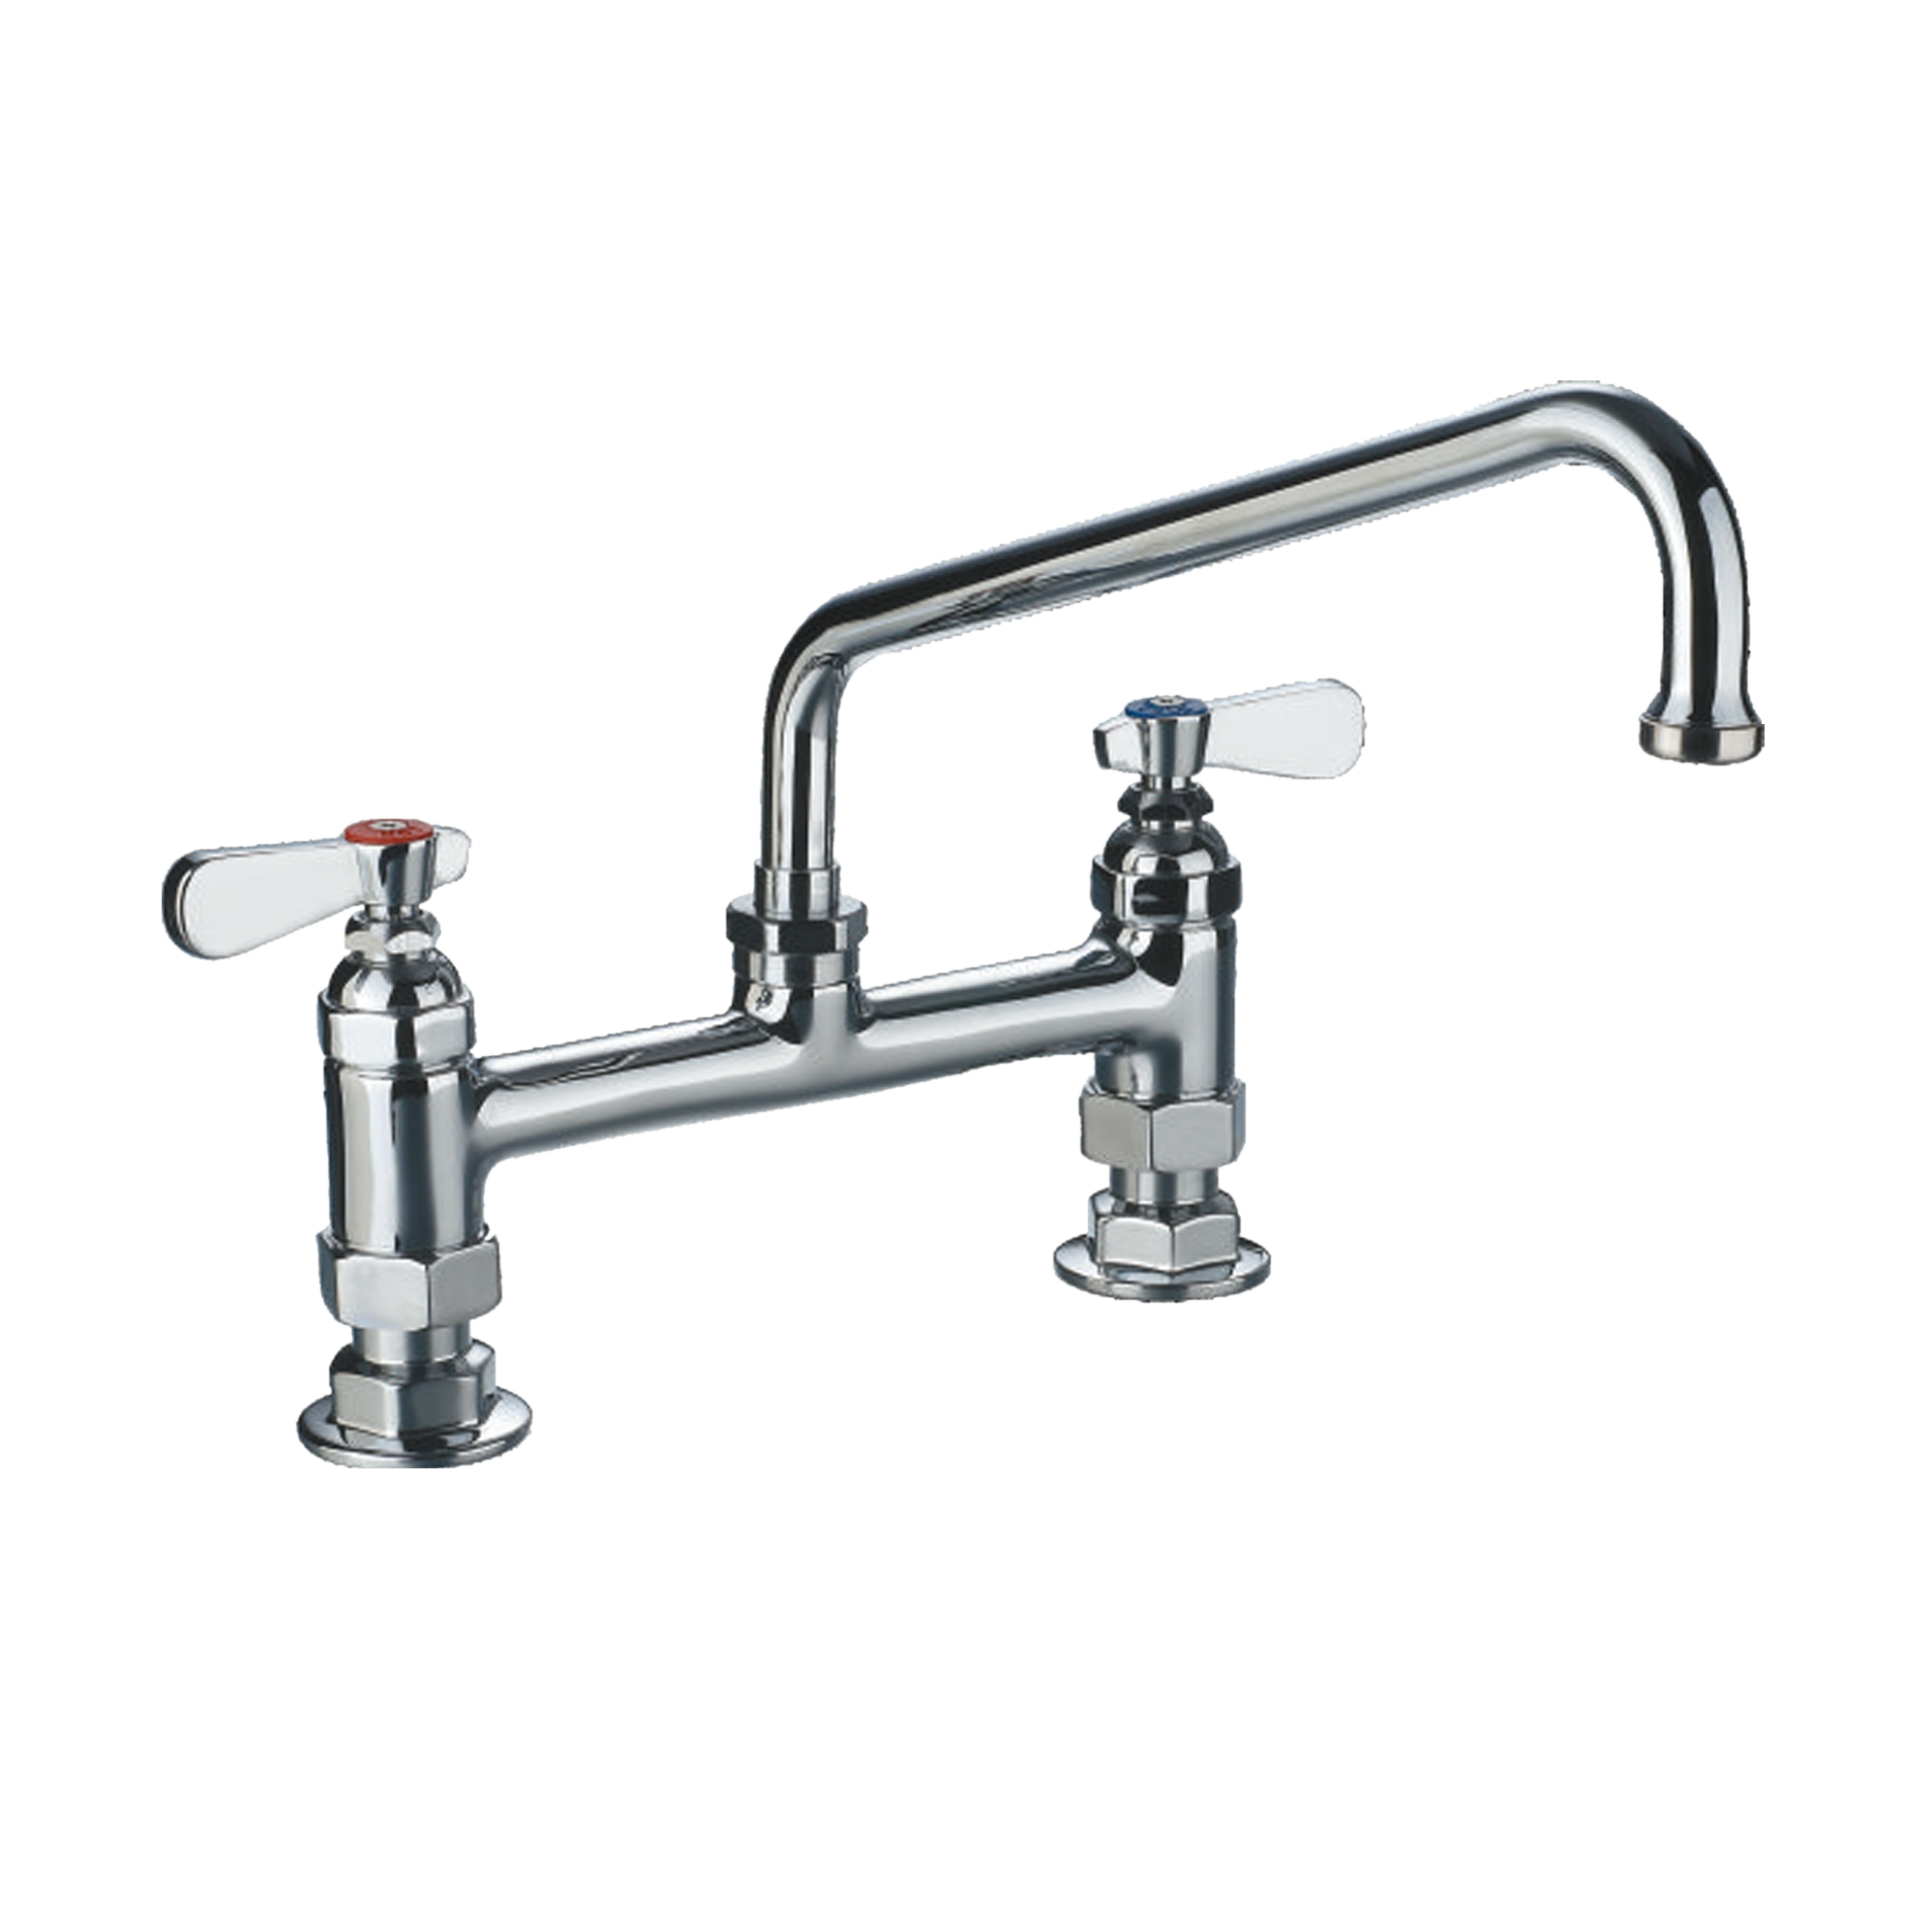 Top-rinse 9813-12 Double Pantry Faucet